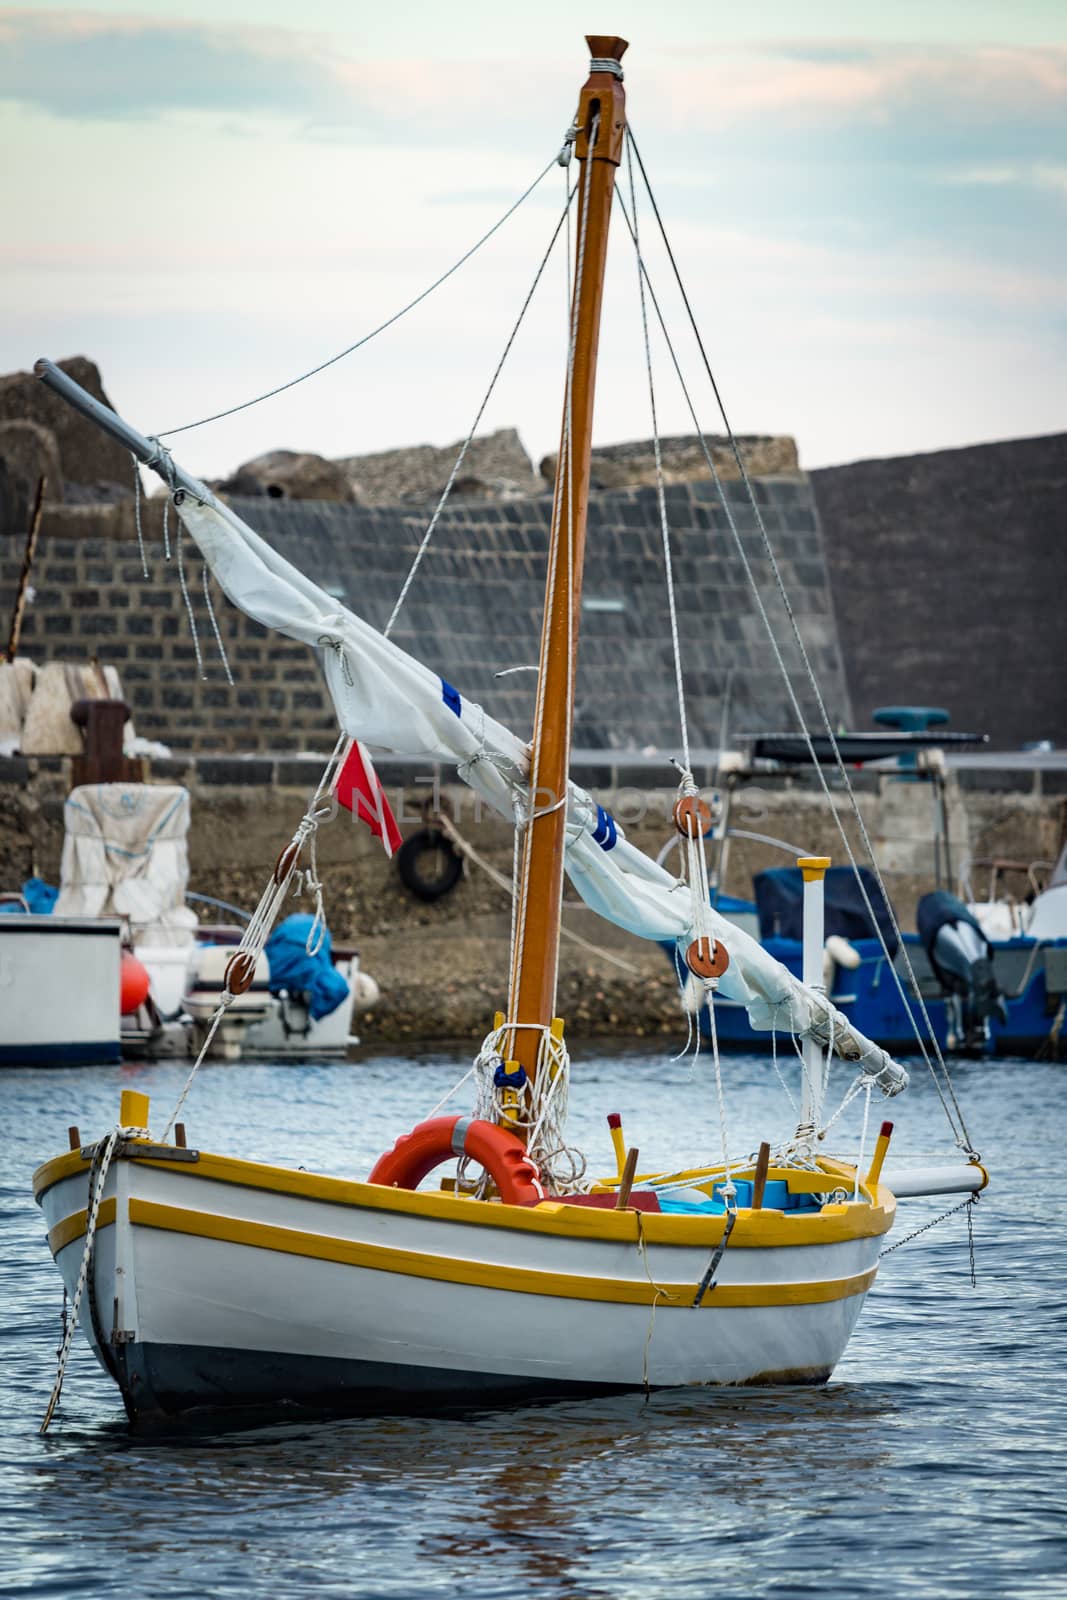 Sicily - Italy. The sailboat anchored in the harbor.